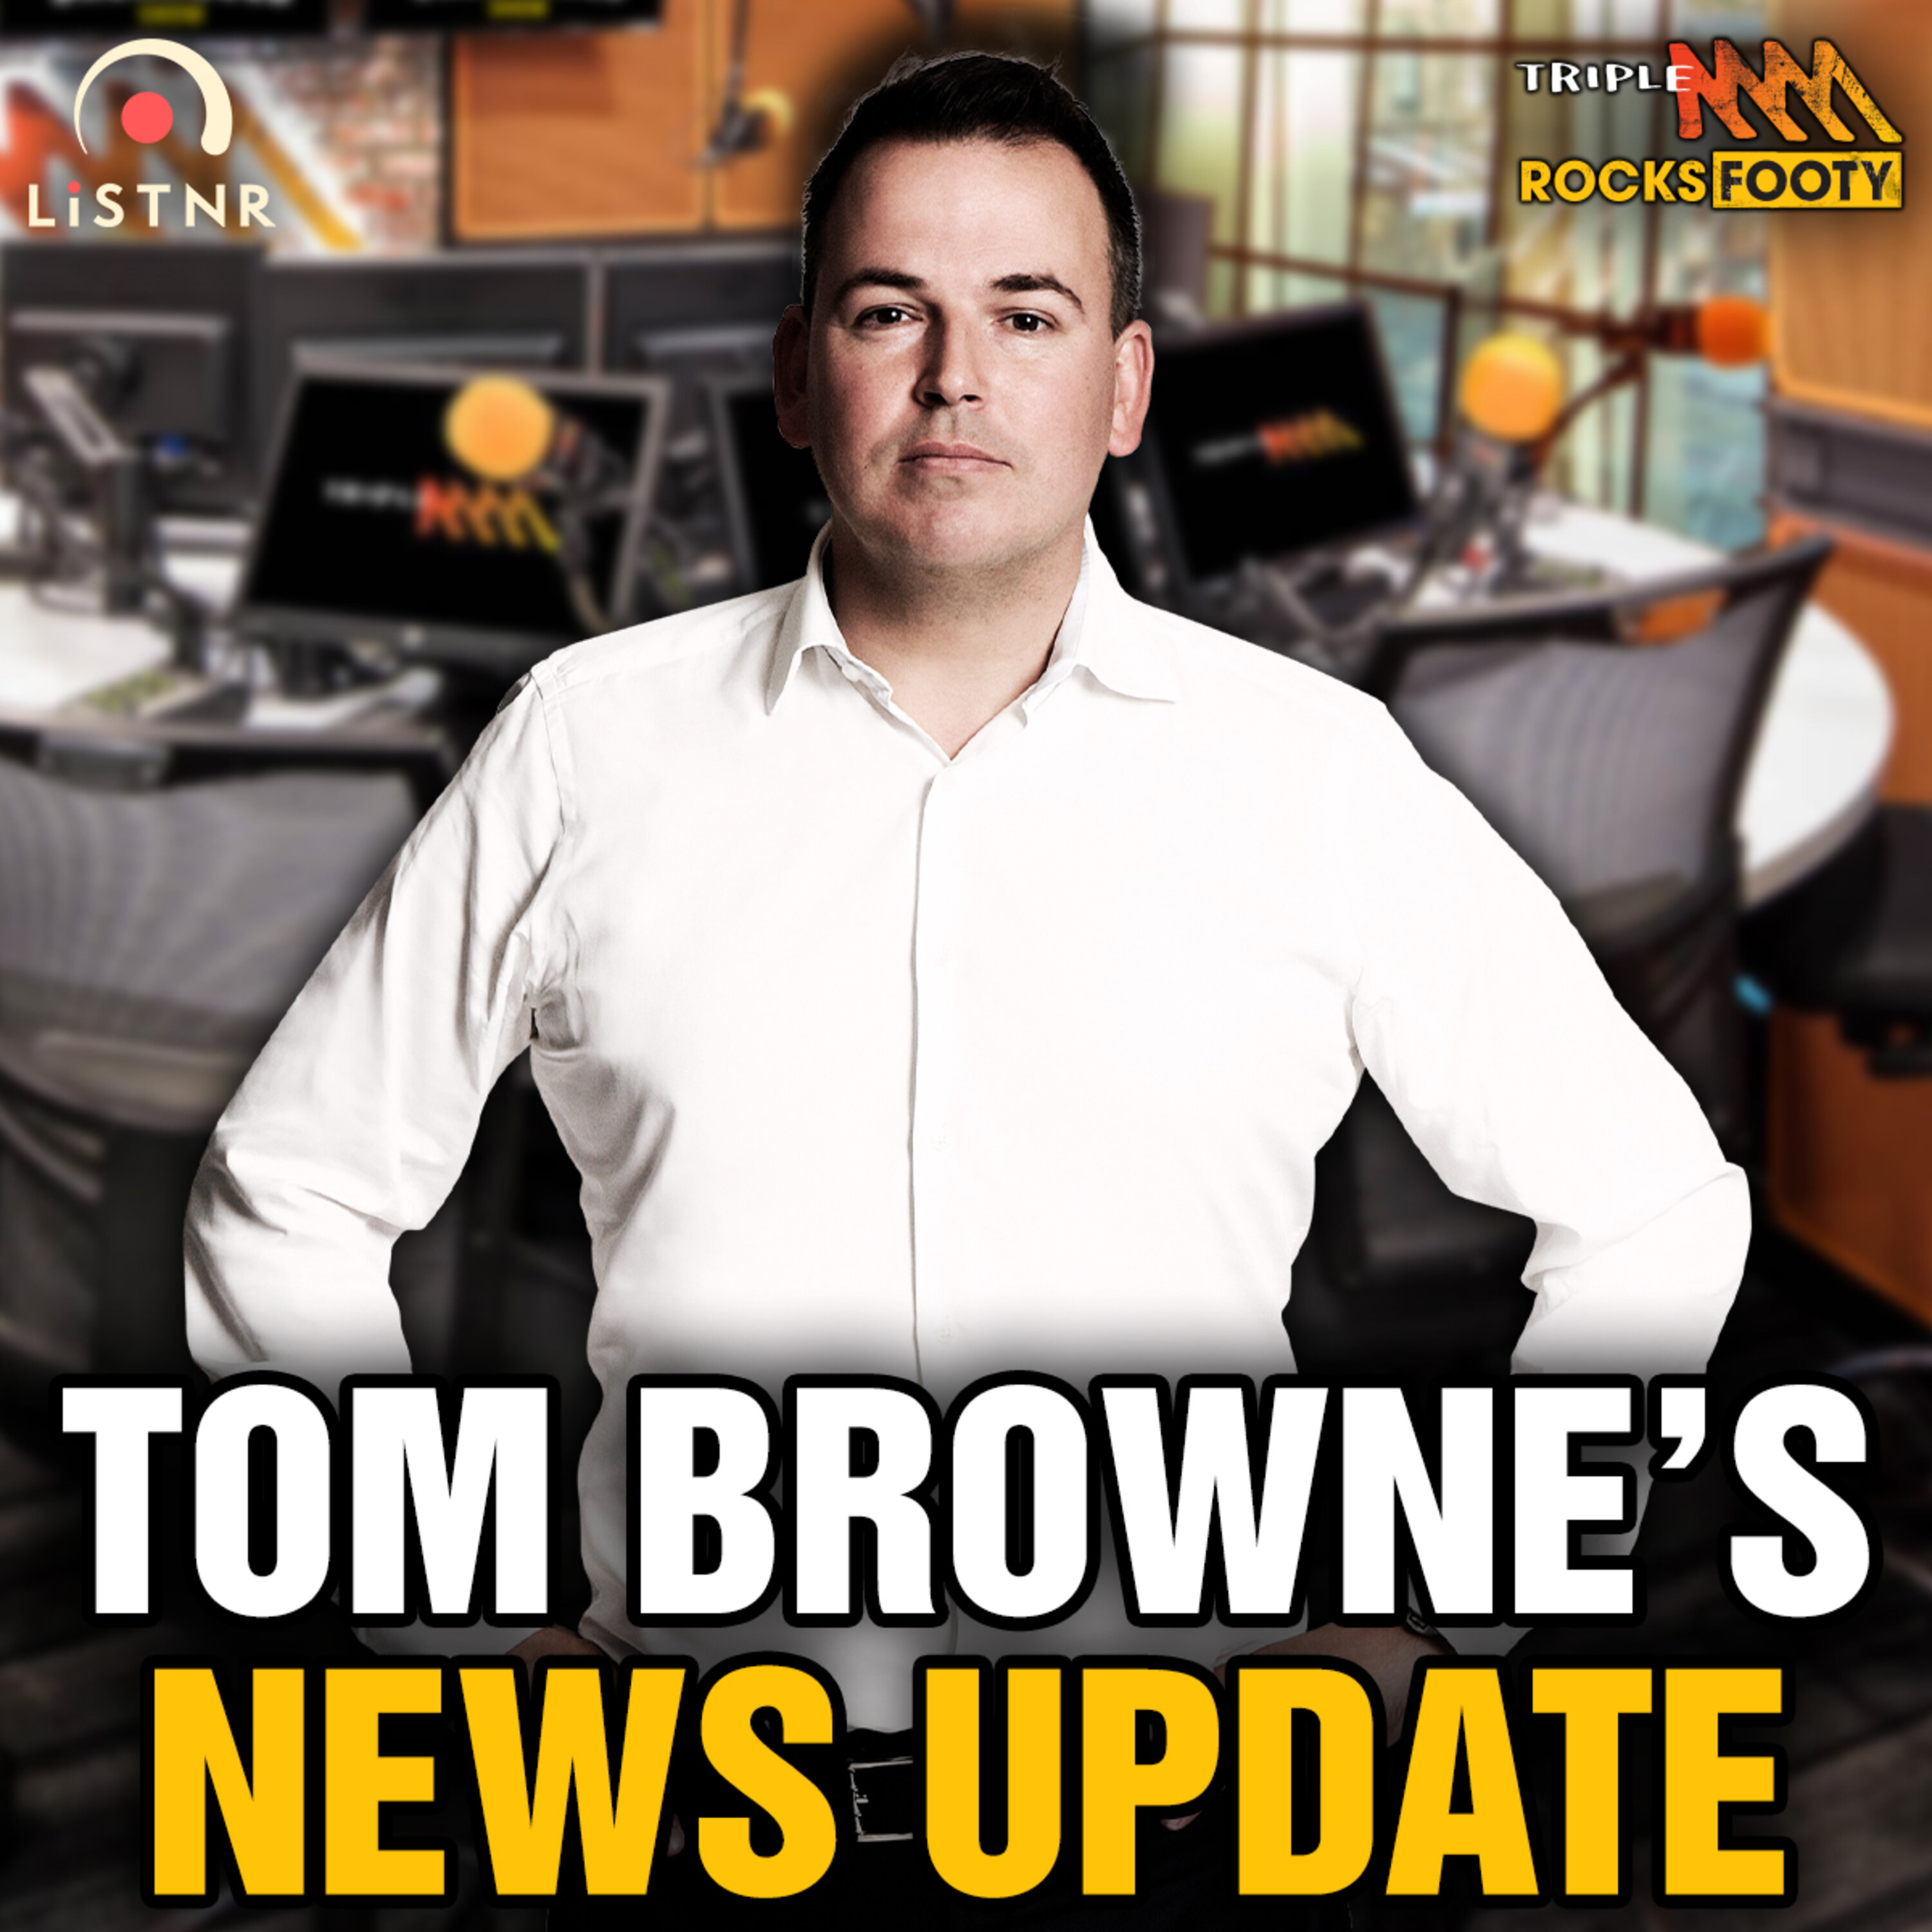 Tom Browne's News | Ross Lyon's Marvel criticism, the Ben McKay audio that backs it up, will Brodie Grundy get back?